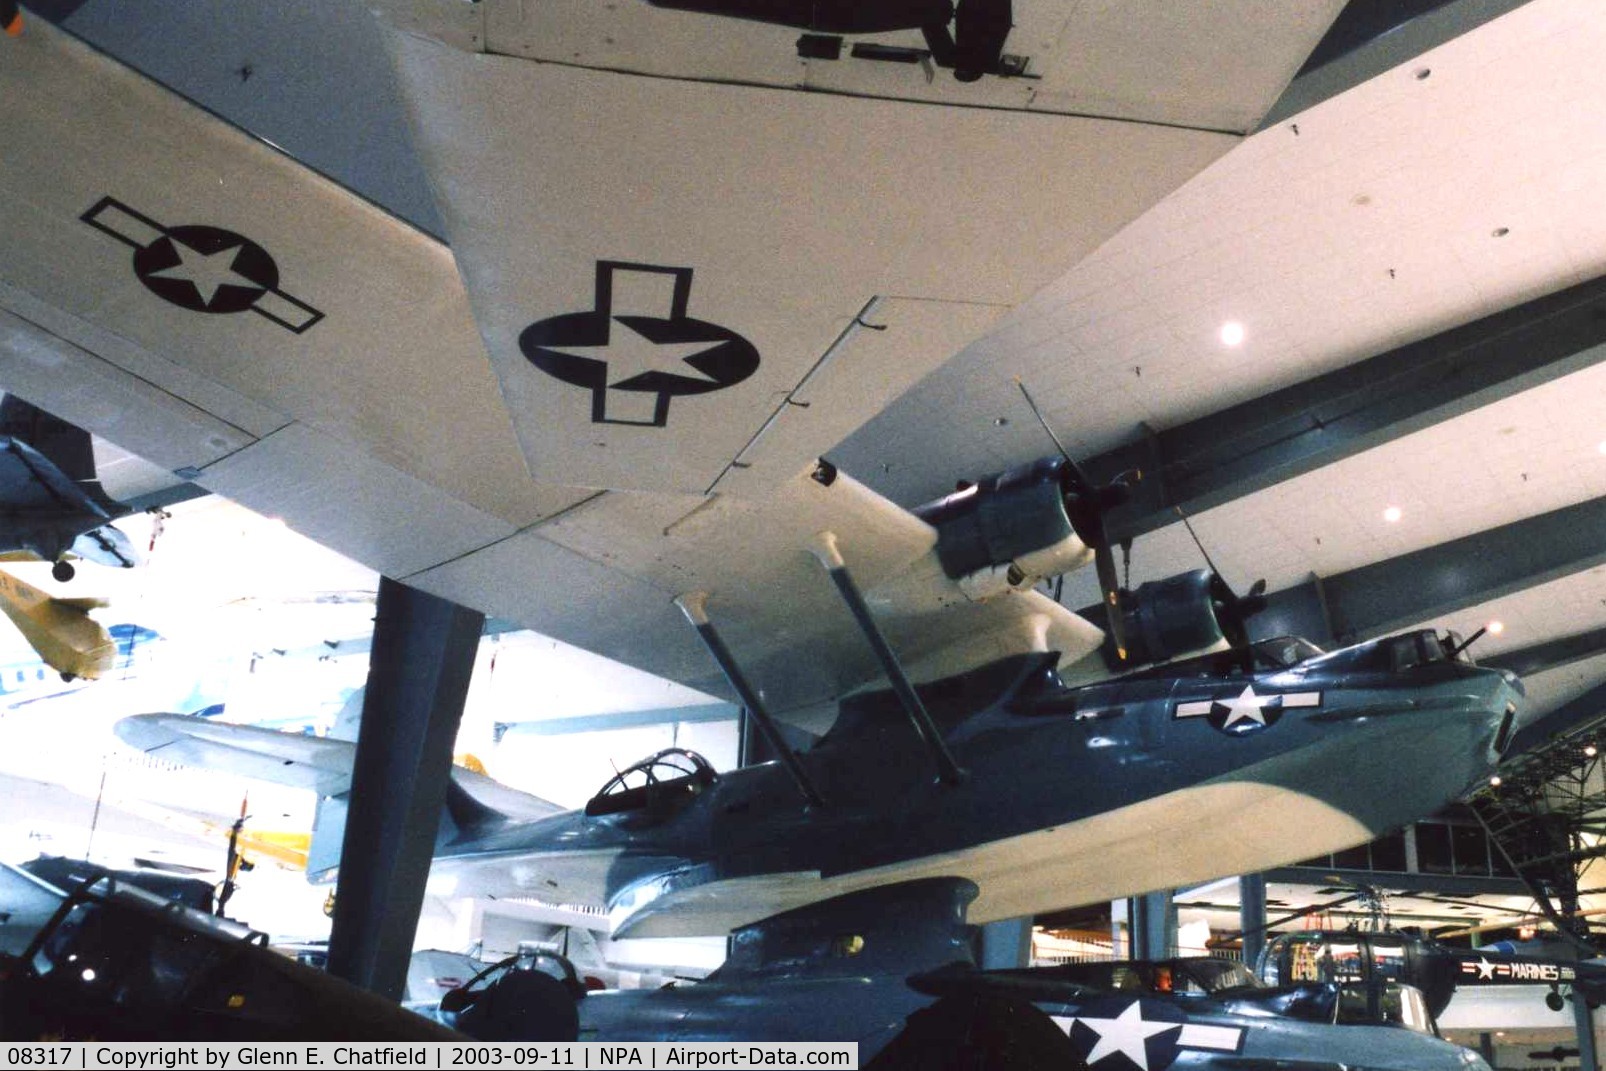 08317, Consolidated PBY-5 Catalina C/N 1231, PBY-5 at the National Museum of Naval Aviation